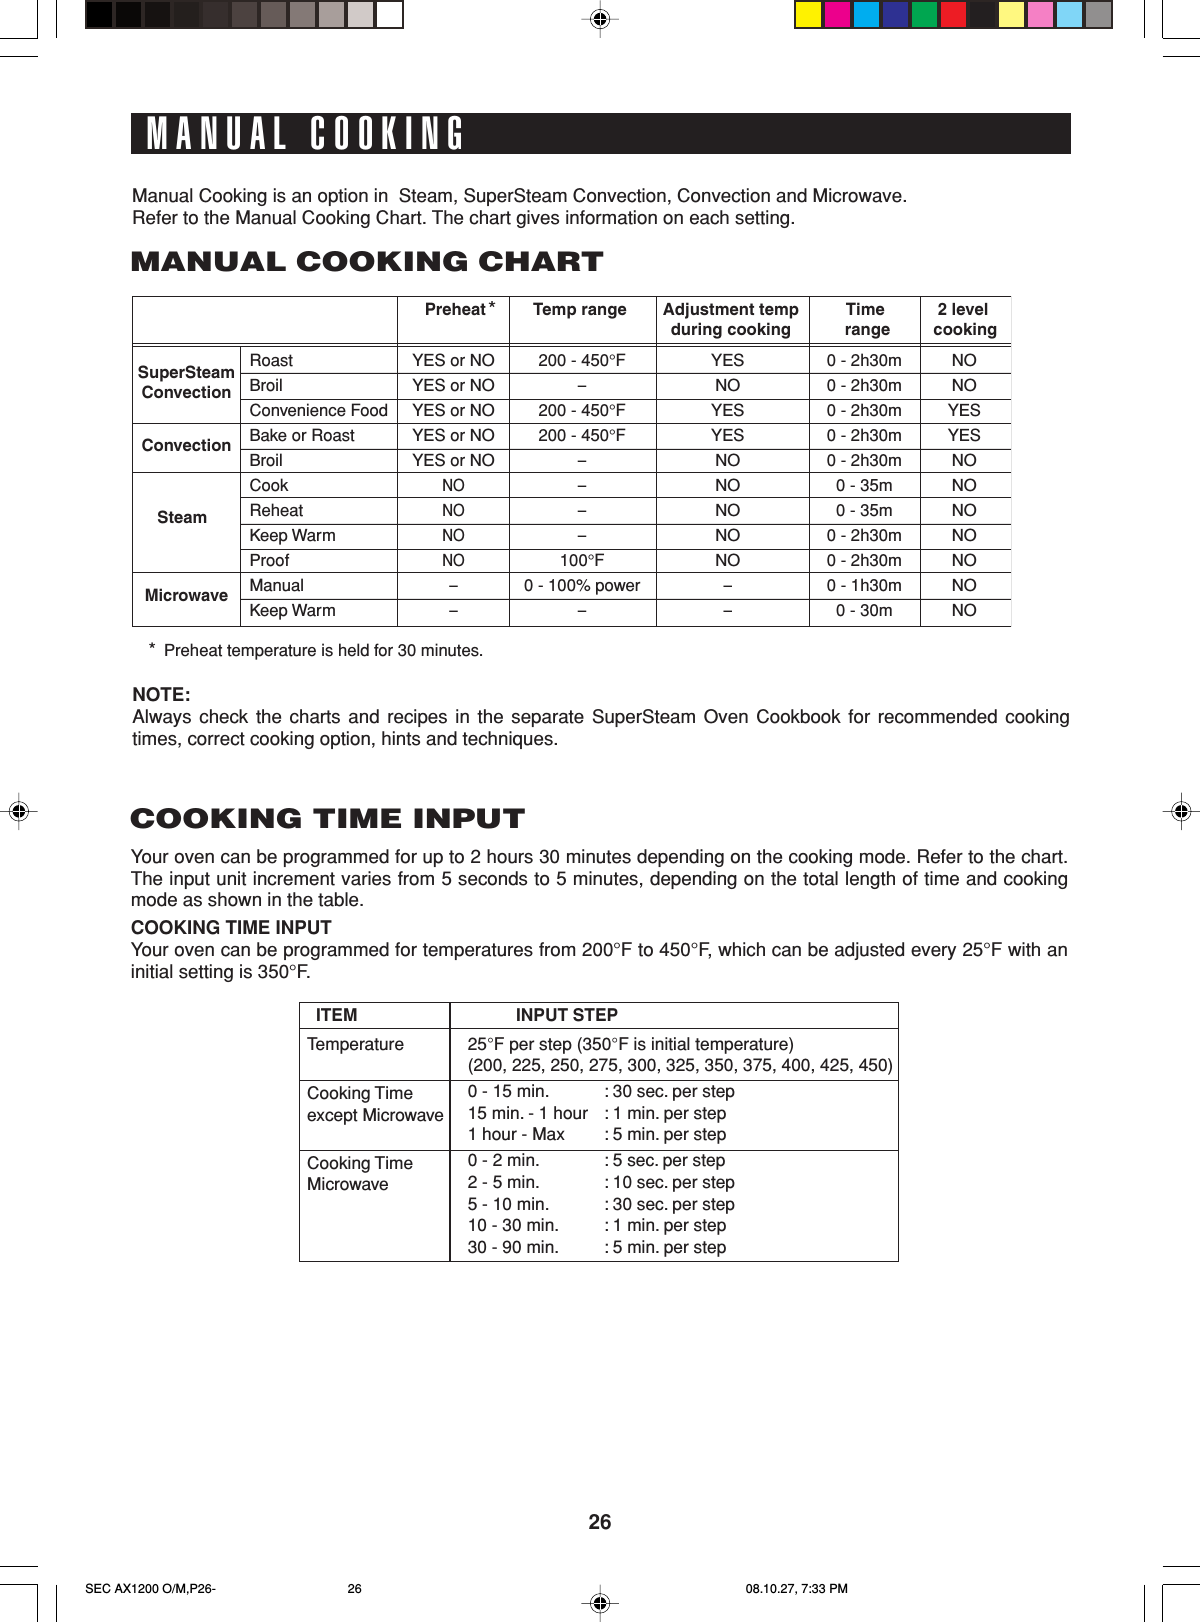 26MANUAL COOKINGManual Cooking is an option in  Steam, SuperSteam Convection, Convection and Microwave.Refer to the Manual Cooking Chart. The chart gives information on each setting.NOTE:Always check the charts and recipes in the separate SuperSteam Oven Cookbook for recommended cookingtimes, correct cooking option, hints and techniques.COOKING TIME INPUTYour oven can be programmed for up to 2 hours 30 minutes depending on the cooking mode. Refer to the chart.The input unit increment varies from 5 seconds to 5 minutes, depending on the total length of time and cookingmode as shown in the table.COOKING TIME INPUTYour oven can be programmed for temperatures from 200°F to 450°F, which can be adjusted every 25°F with aninitial setting is 350°F.TemperatureCooking Timeexcept MicrowaveCooking TimeMicrowave25°F per step (350°F is initial temperature)(200, 225, 250, 275, 300, 325, 350, 375, 400, 425, 450)0 - 15 min.            15 min. - 1 hour 1 hour - Max     0 - 2 min.             2 - 5 min.            5 - 10 min.            10 - 30 min.          30 - 90 min. : 30 sec. per step: 1 min. per step: 5 min. per step: 5 sec. per step: 10 sec. per step: 30 sec. per step: 1 min. per step: 5 min. per stepITEM INPUT STEPPreheatRoastBroilConvenience FoodBake or RoastBroilCookReheatKeep WarmProofManualKeep WarmYES or NOYES or NOYES or NOYES or NOYES or NONONONONO--200 - 450°F-200 - 450°F200 - 450°F----100°F0 - 100% power-0 - 2h30m0 - 2h30m0 - 2h30m0 - 2h30m0 - 2h30m0 - 35m0 - 35m0 - 2h30m0 - 2h30m0 - 1h30m0 - 30mYESNOYESYESNONONONONO--NONOYESYESNONONONONONONOSuperSteamConvectionSteamMicrowaveConvectionTemp range Adjustment tempduring cookingTime range2 level cooking**  Preheat temperature is held for 30 minutes.MANUAL COOKING CHARTSEC AX1200 O/M,P26- 08.10.27, 7:33 PM26